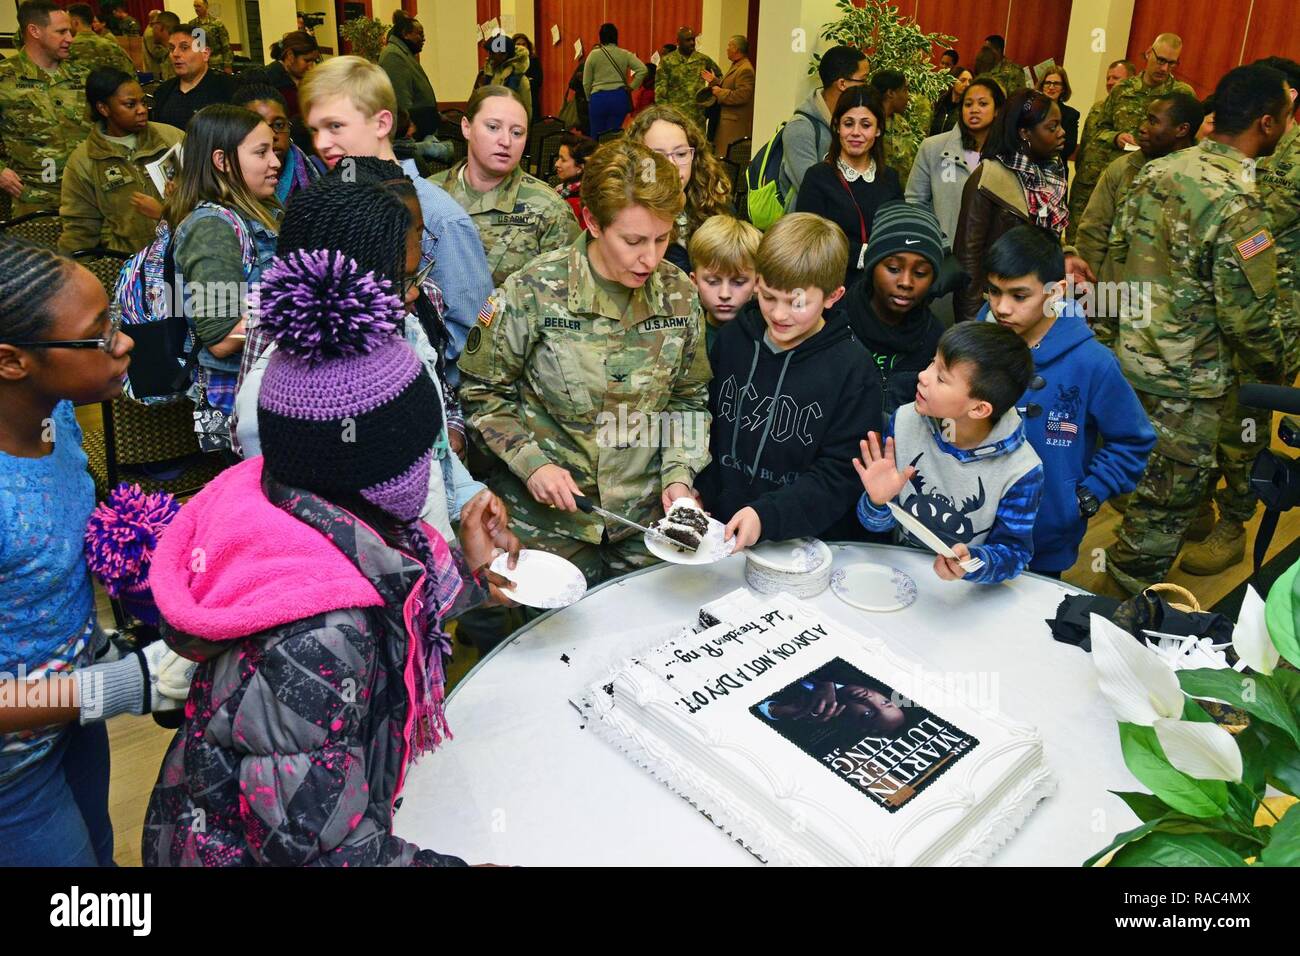 Colonel Christine A. Beeler, commander of the 414th Contracting Support Brigade, serves cake to children, during Martin Luther King, Jr. Day observance, at Vicenza Military Community’s 2017 Observance Ceremony at Caserma Ederle, Vicenza, Italy, Jan. 10, 2017. Stock Photo